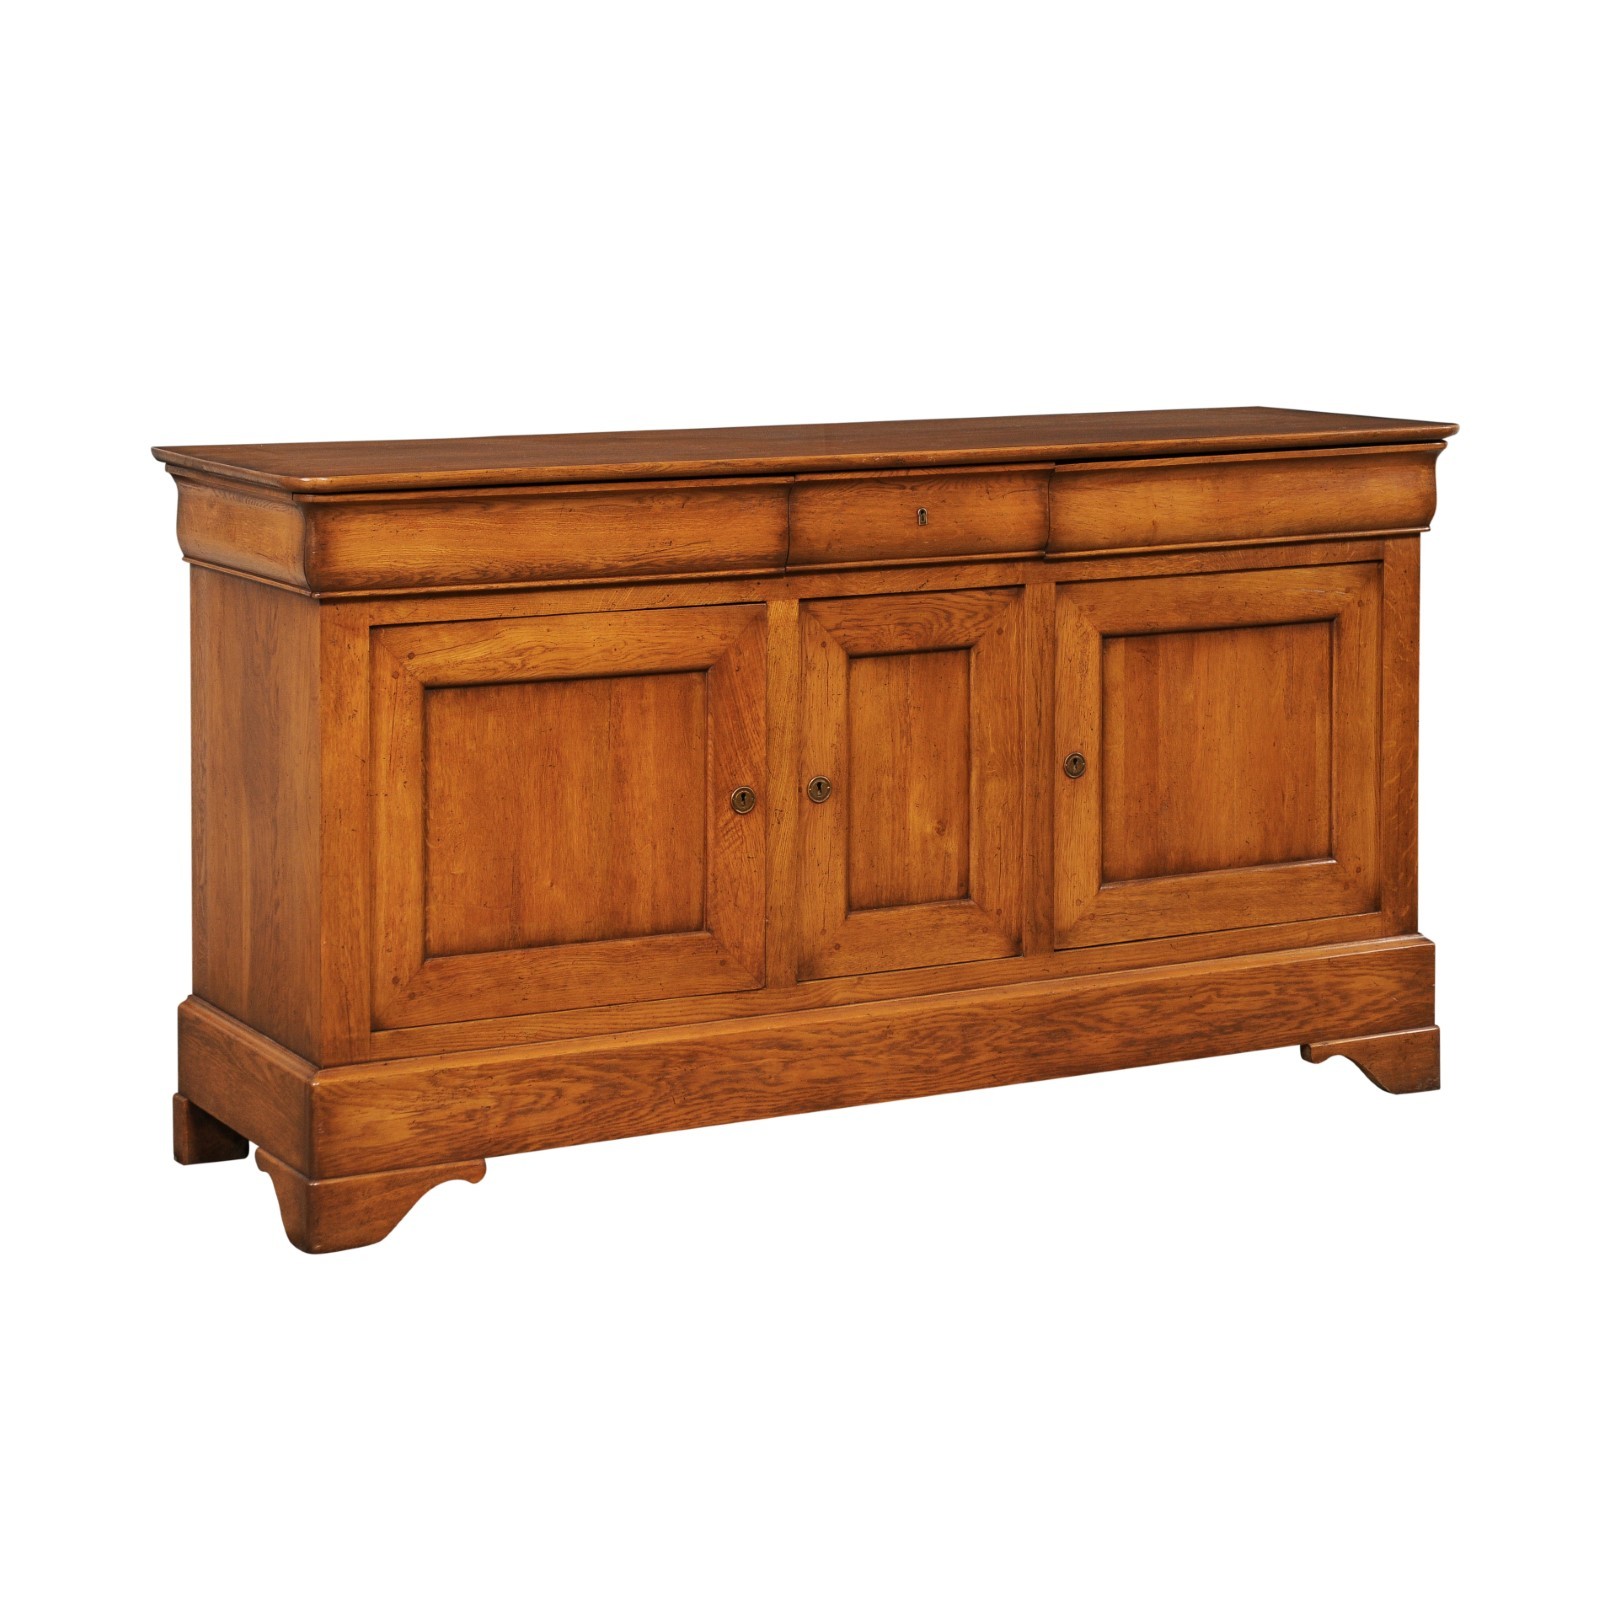 French Fruitwood Buffet Console, Mid 20th C